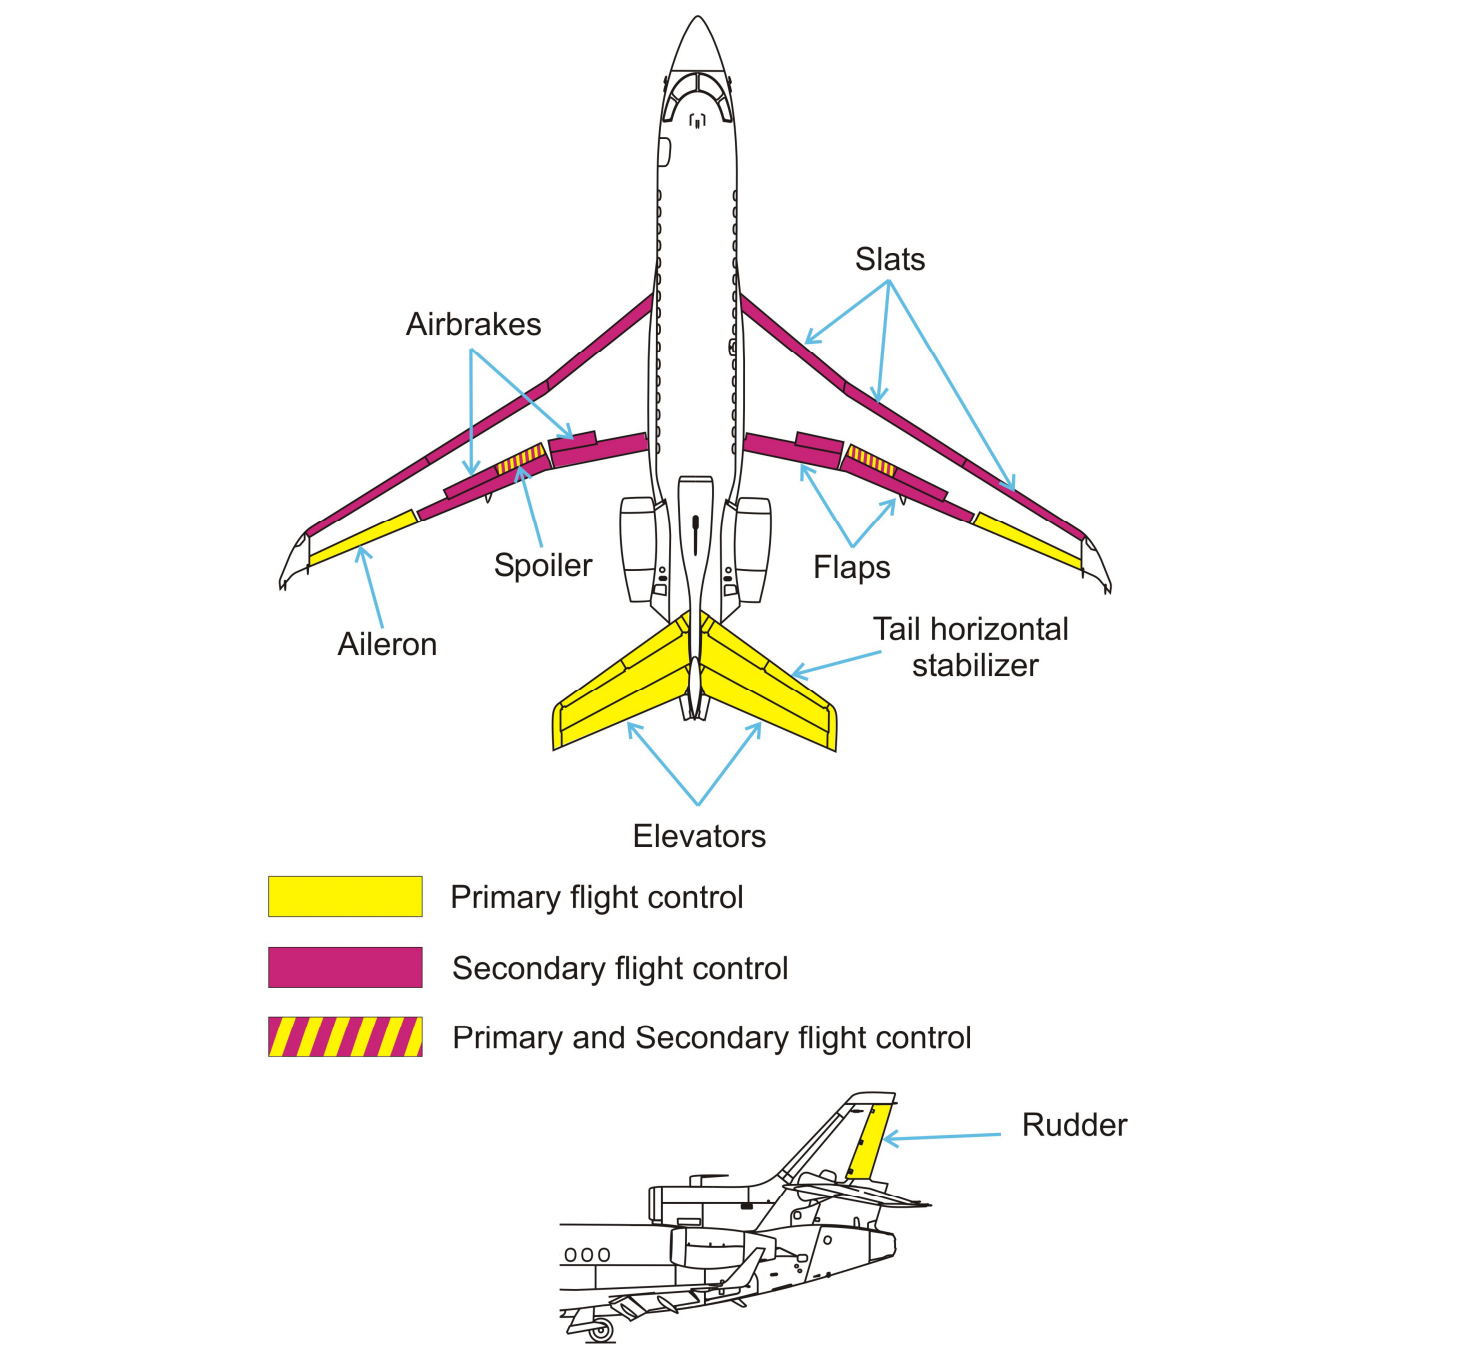 Primary and Secondary flight controls